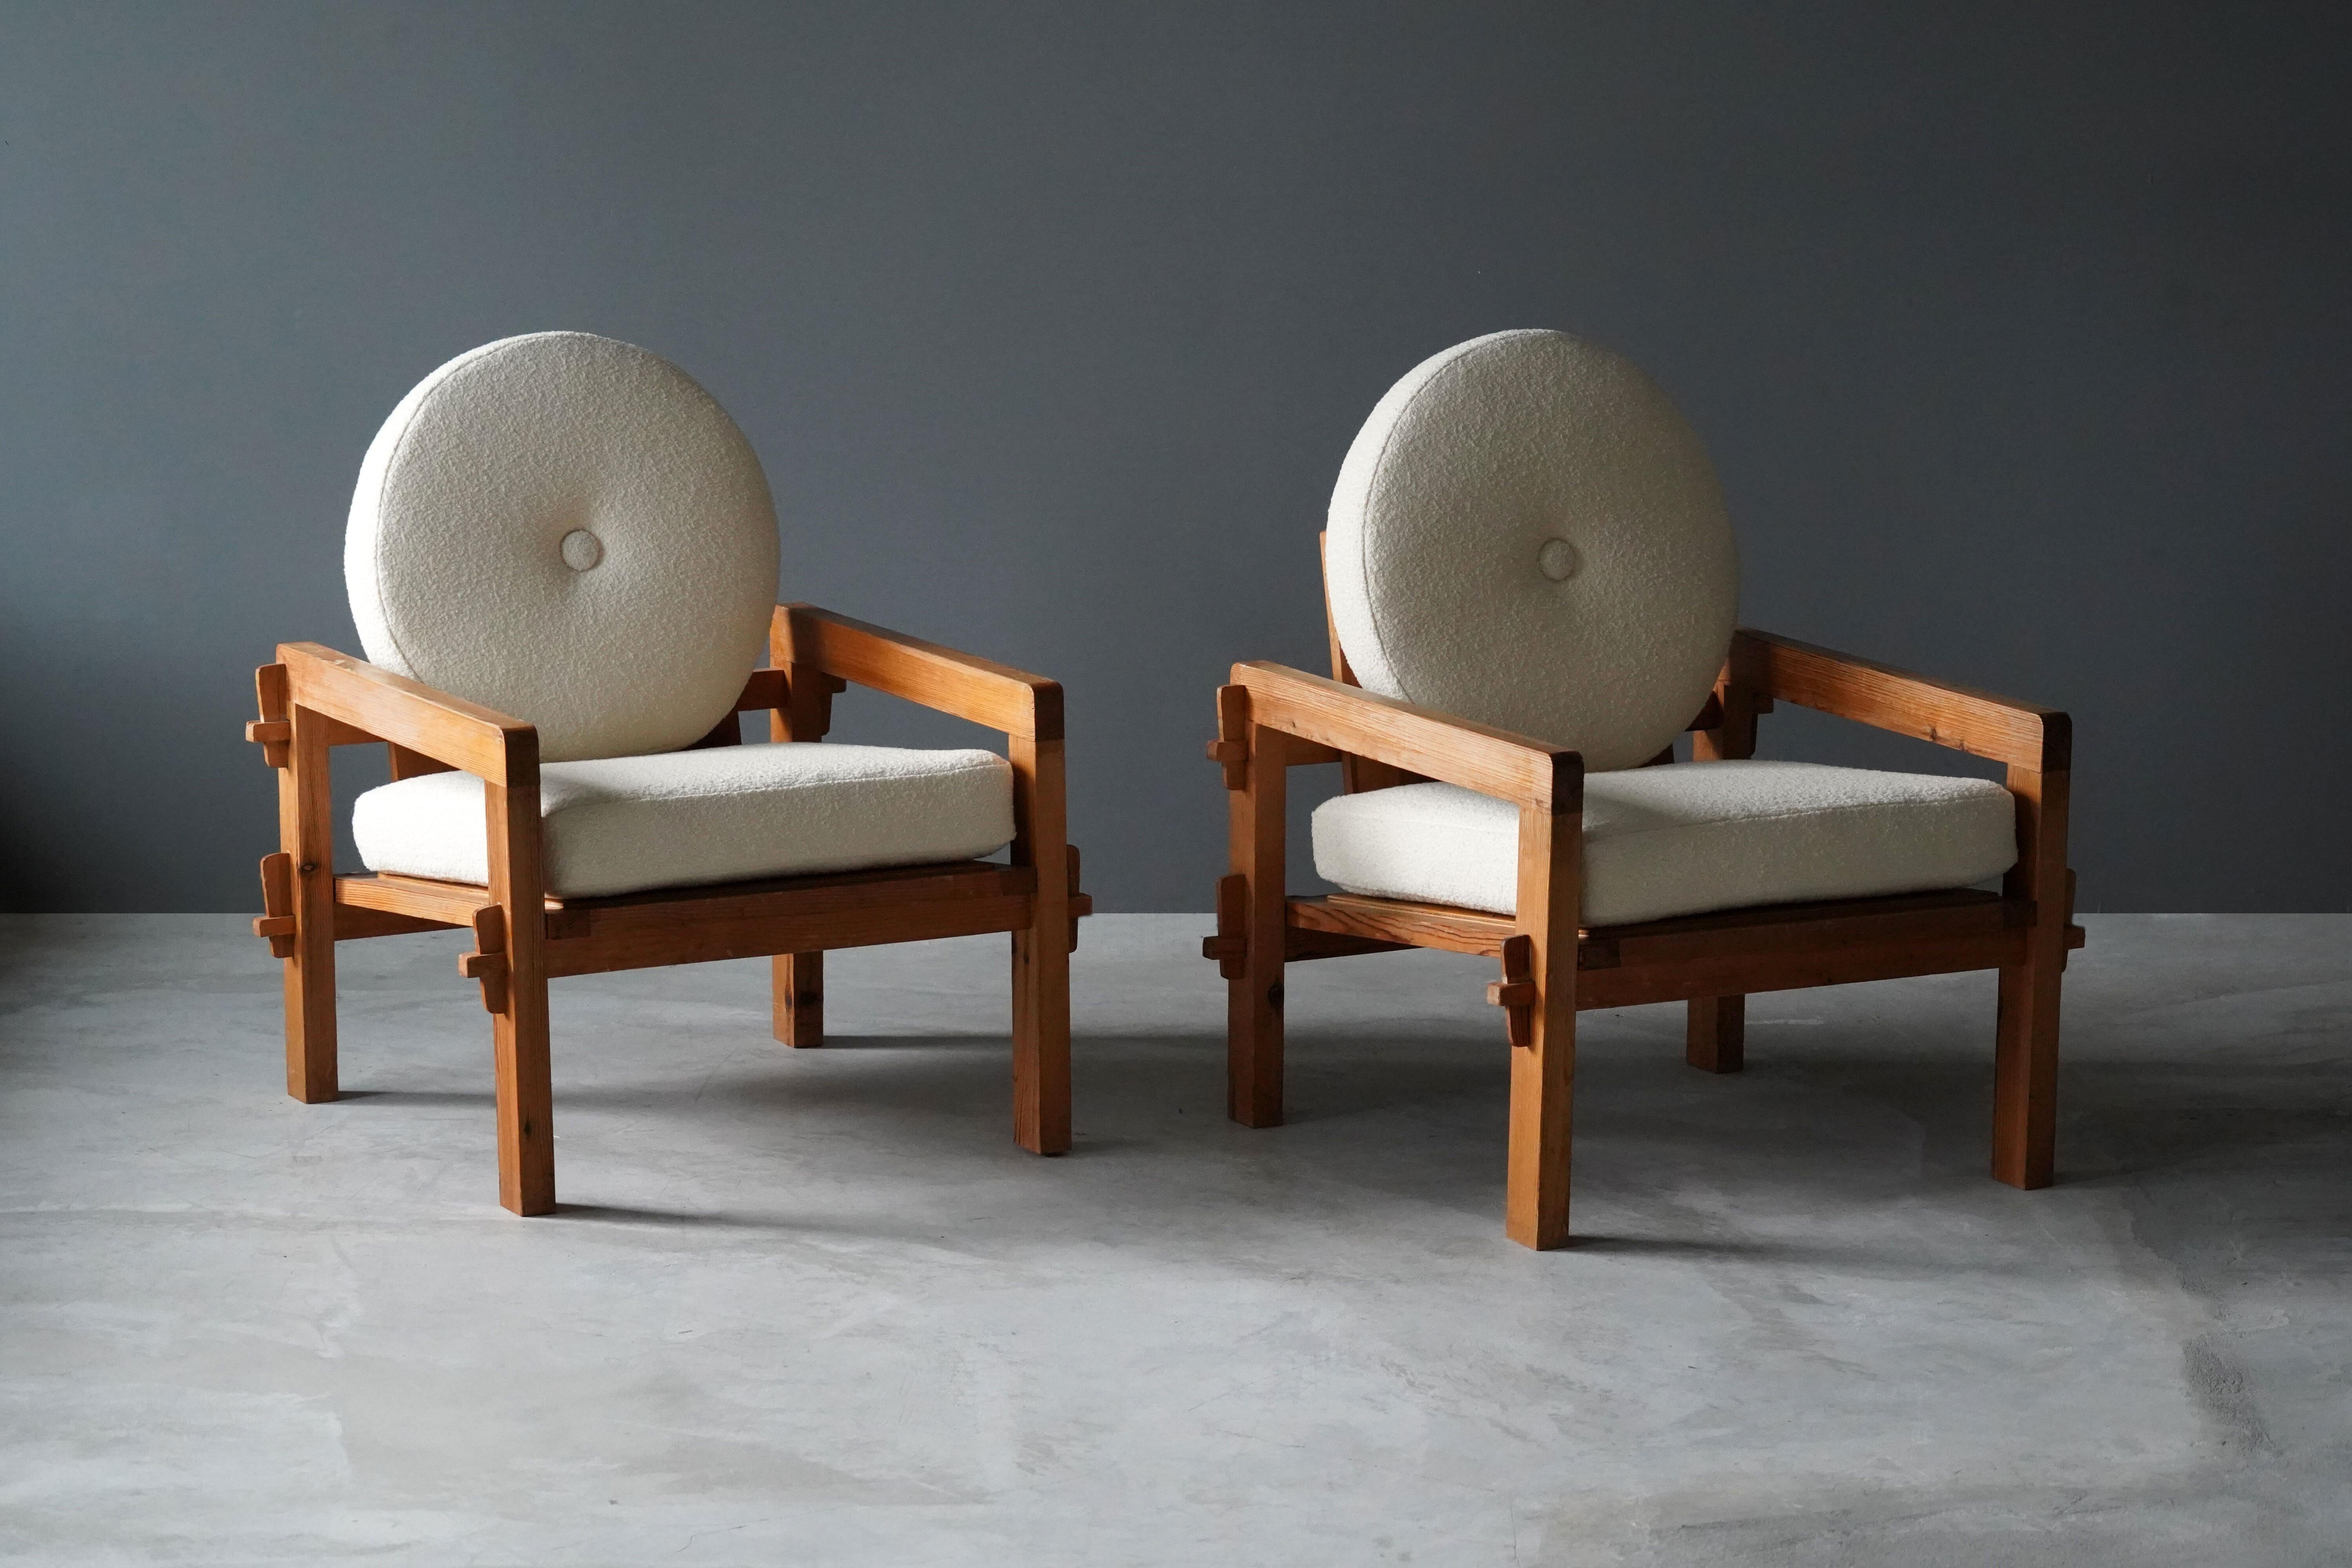 A pair of modernist lounge chair. Designed and made by a Finnish cabinetmaker, Helsinki, 1960s. In solid stained pine, with revealed joinery. Cushions upholstered in brand new high-end bouclé fabric.

Other designers of the period include Axel